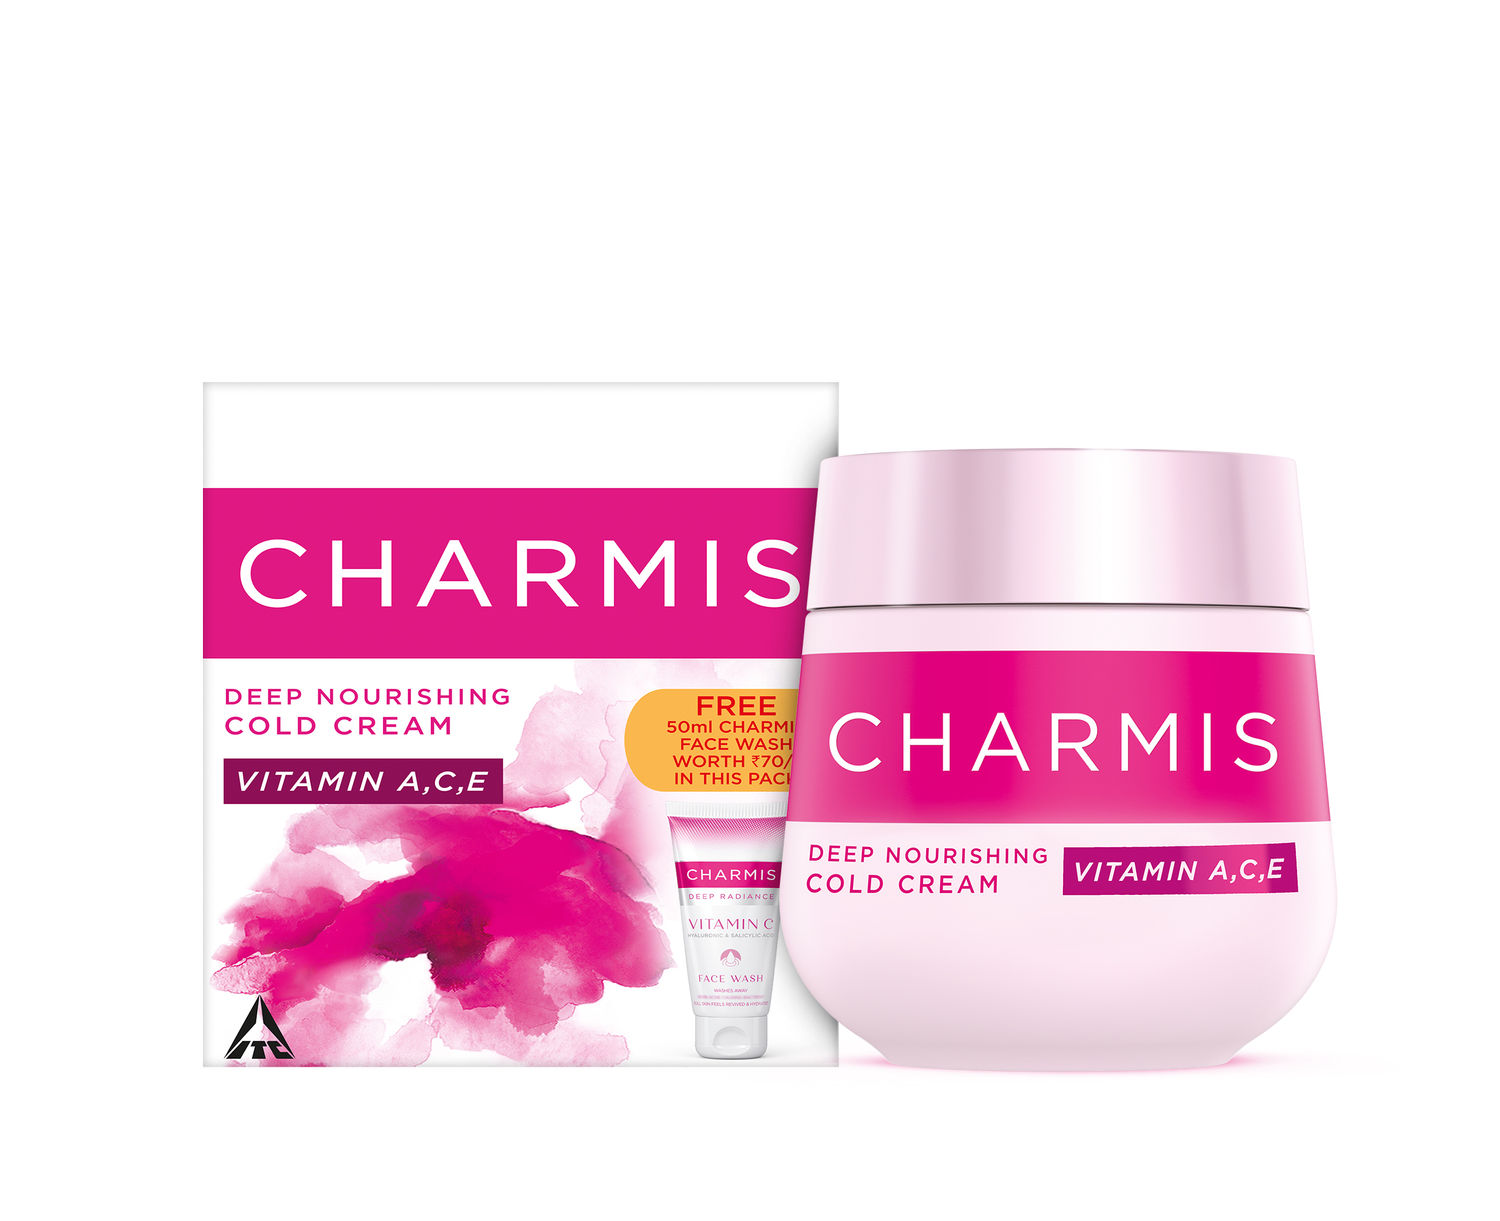 Buy Charmis Deep Nourishing Cold Cream with Vitamin C, A & E, for glowing & nourished skin with Charmis VITAMIN C Facewash FREE - Purplle